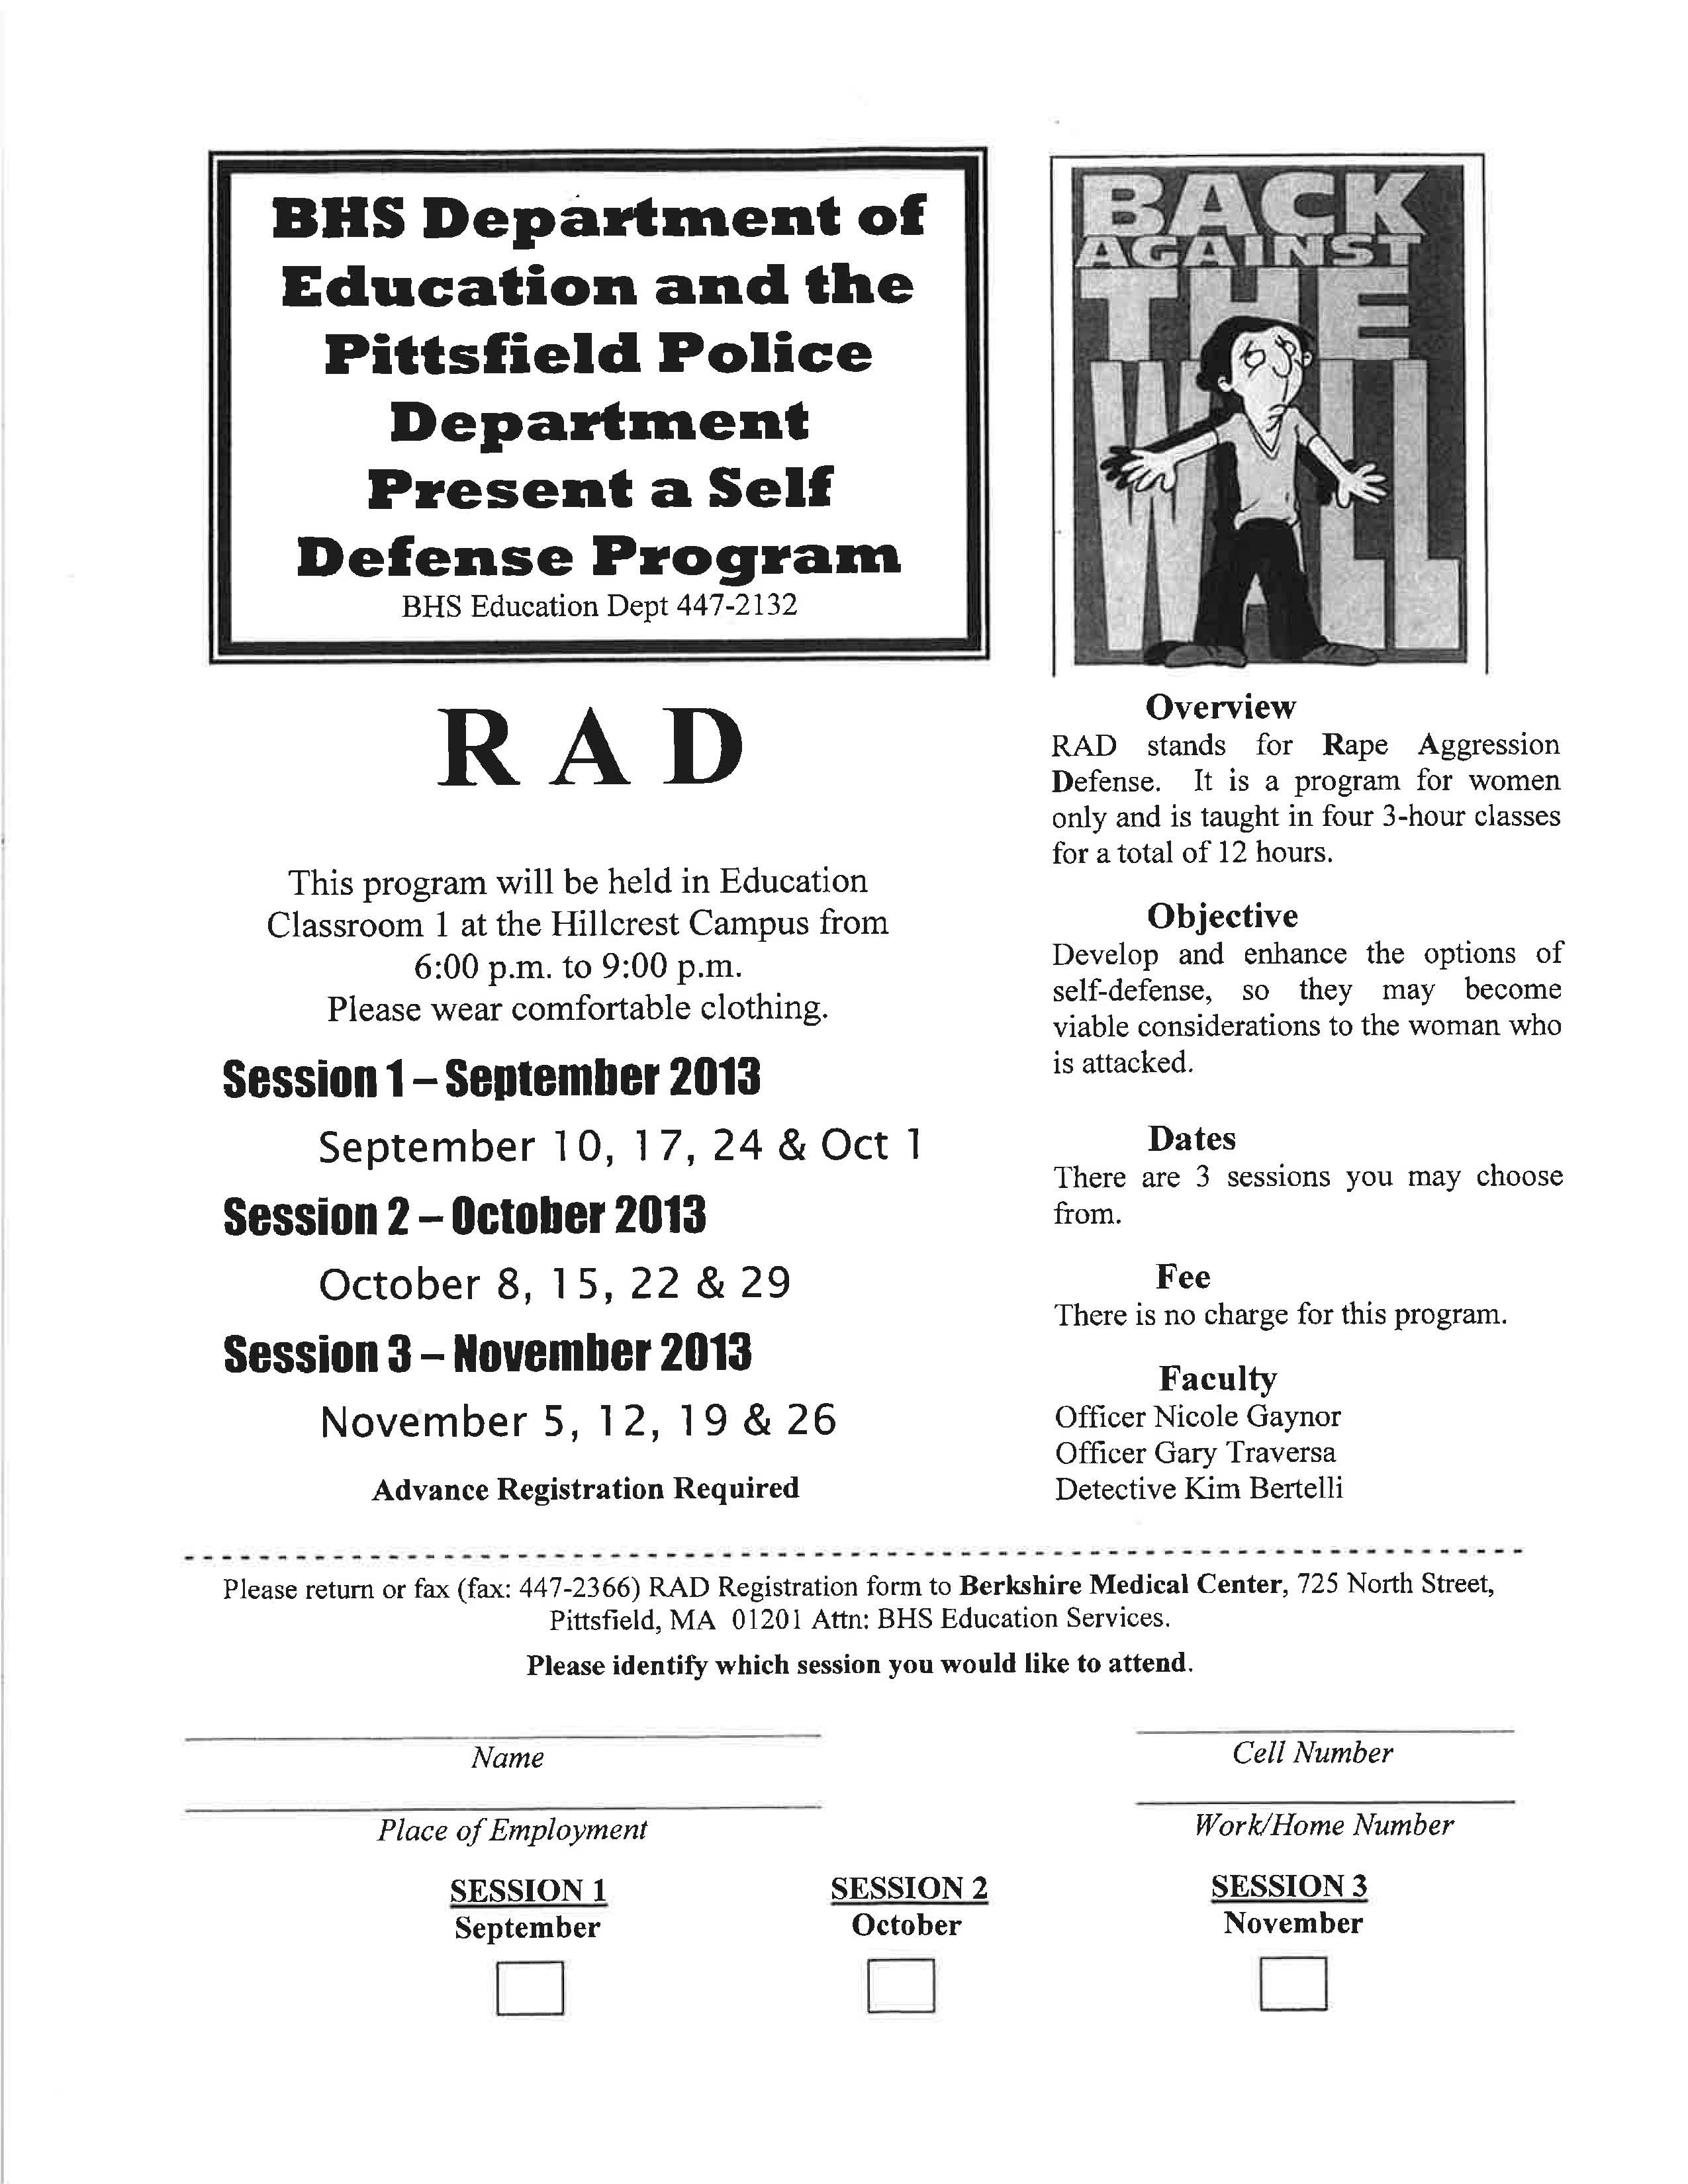 PPD and Berkshire Health Systems Self Defense Program